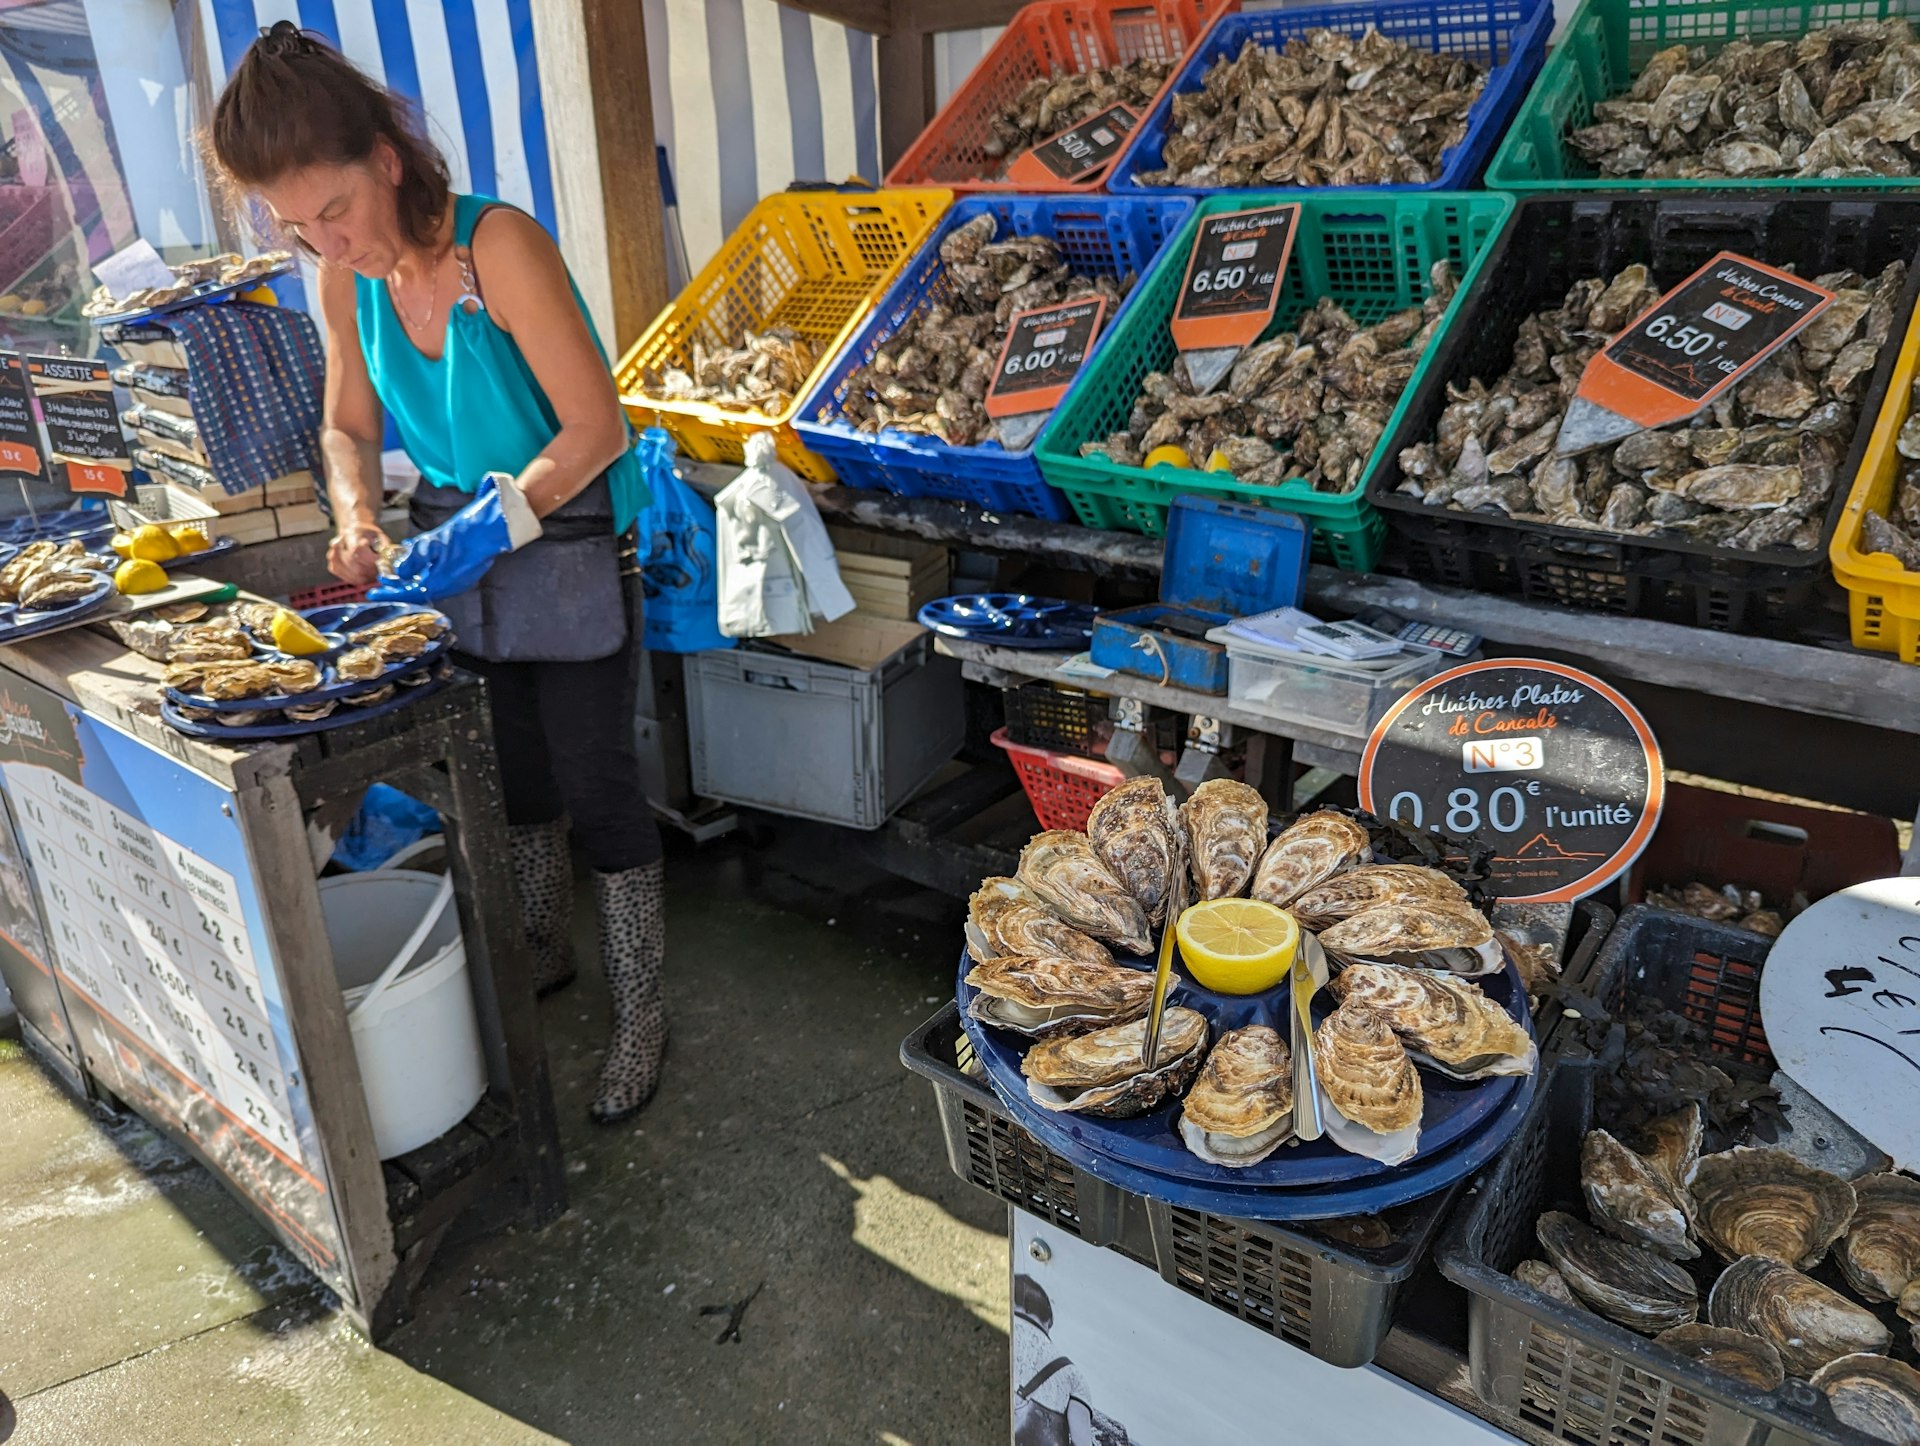 The Cancale Oyster festival gets underway in Cancale, Brittany, France